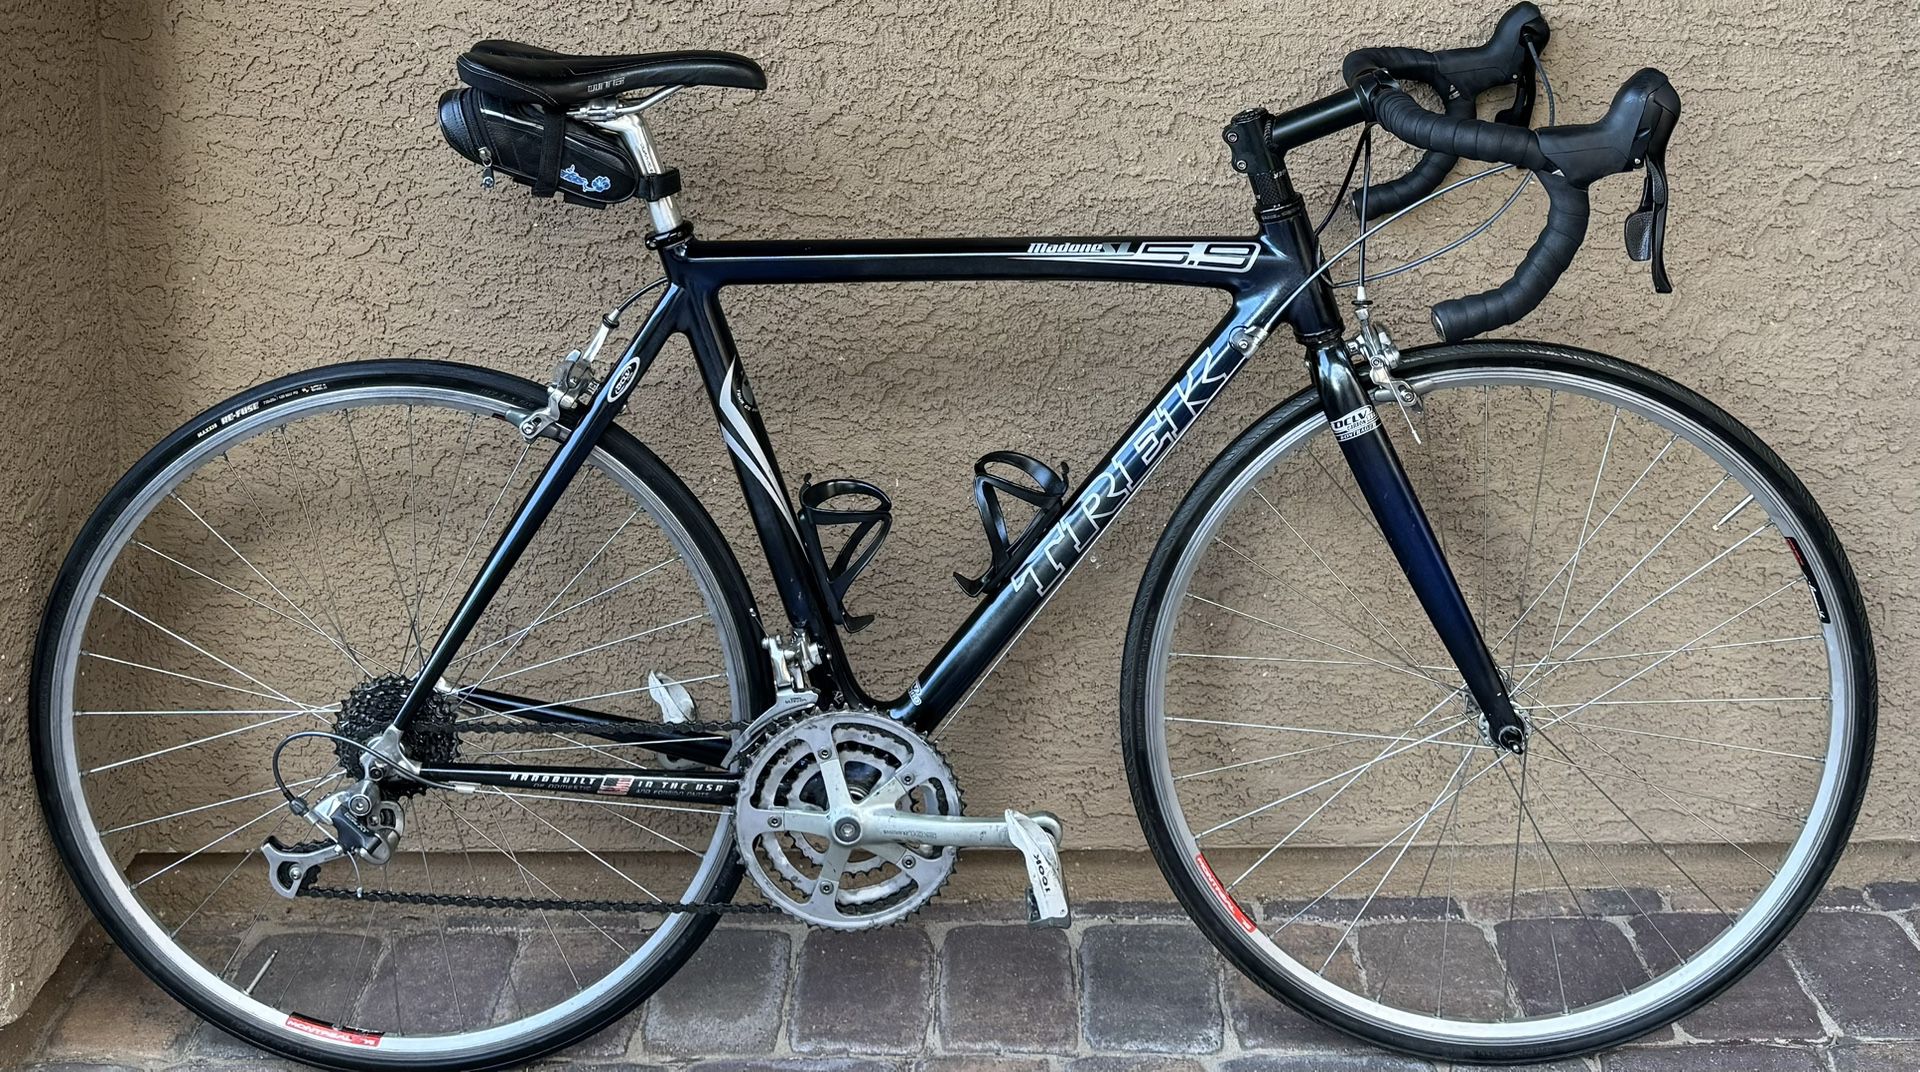 Trek Madone 5.9 CARBON Road Bike Size 54 Cm $500 Takes It Does Need A Tune Up In Great Overall Condition 